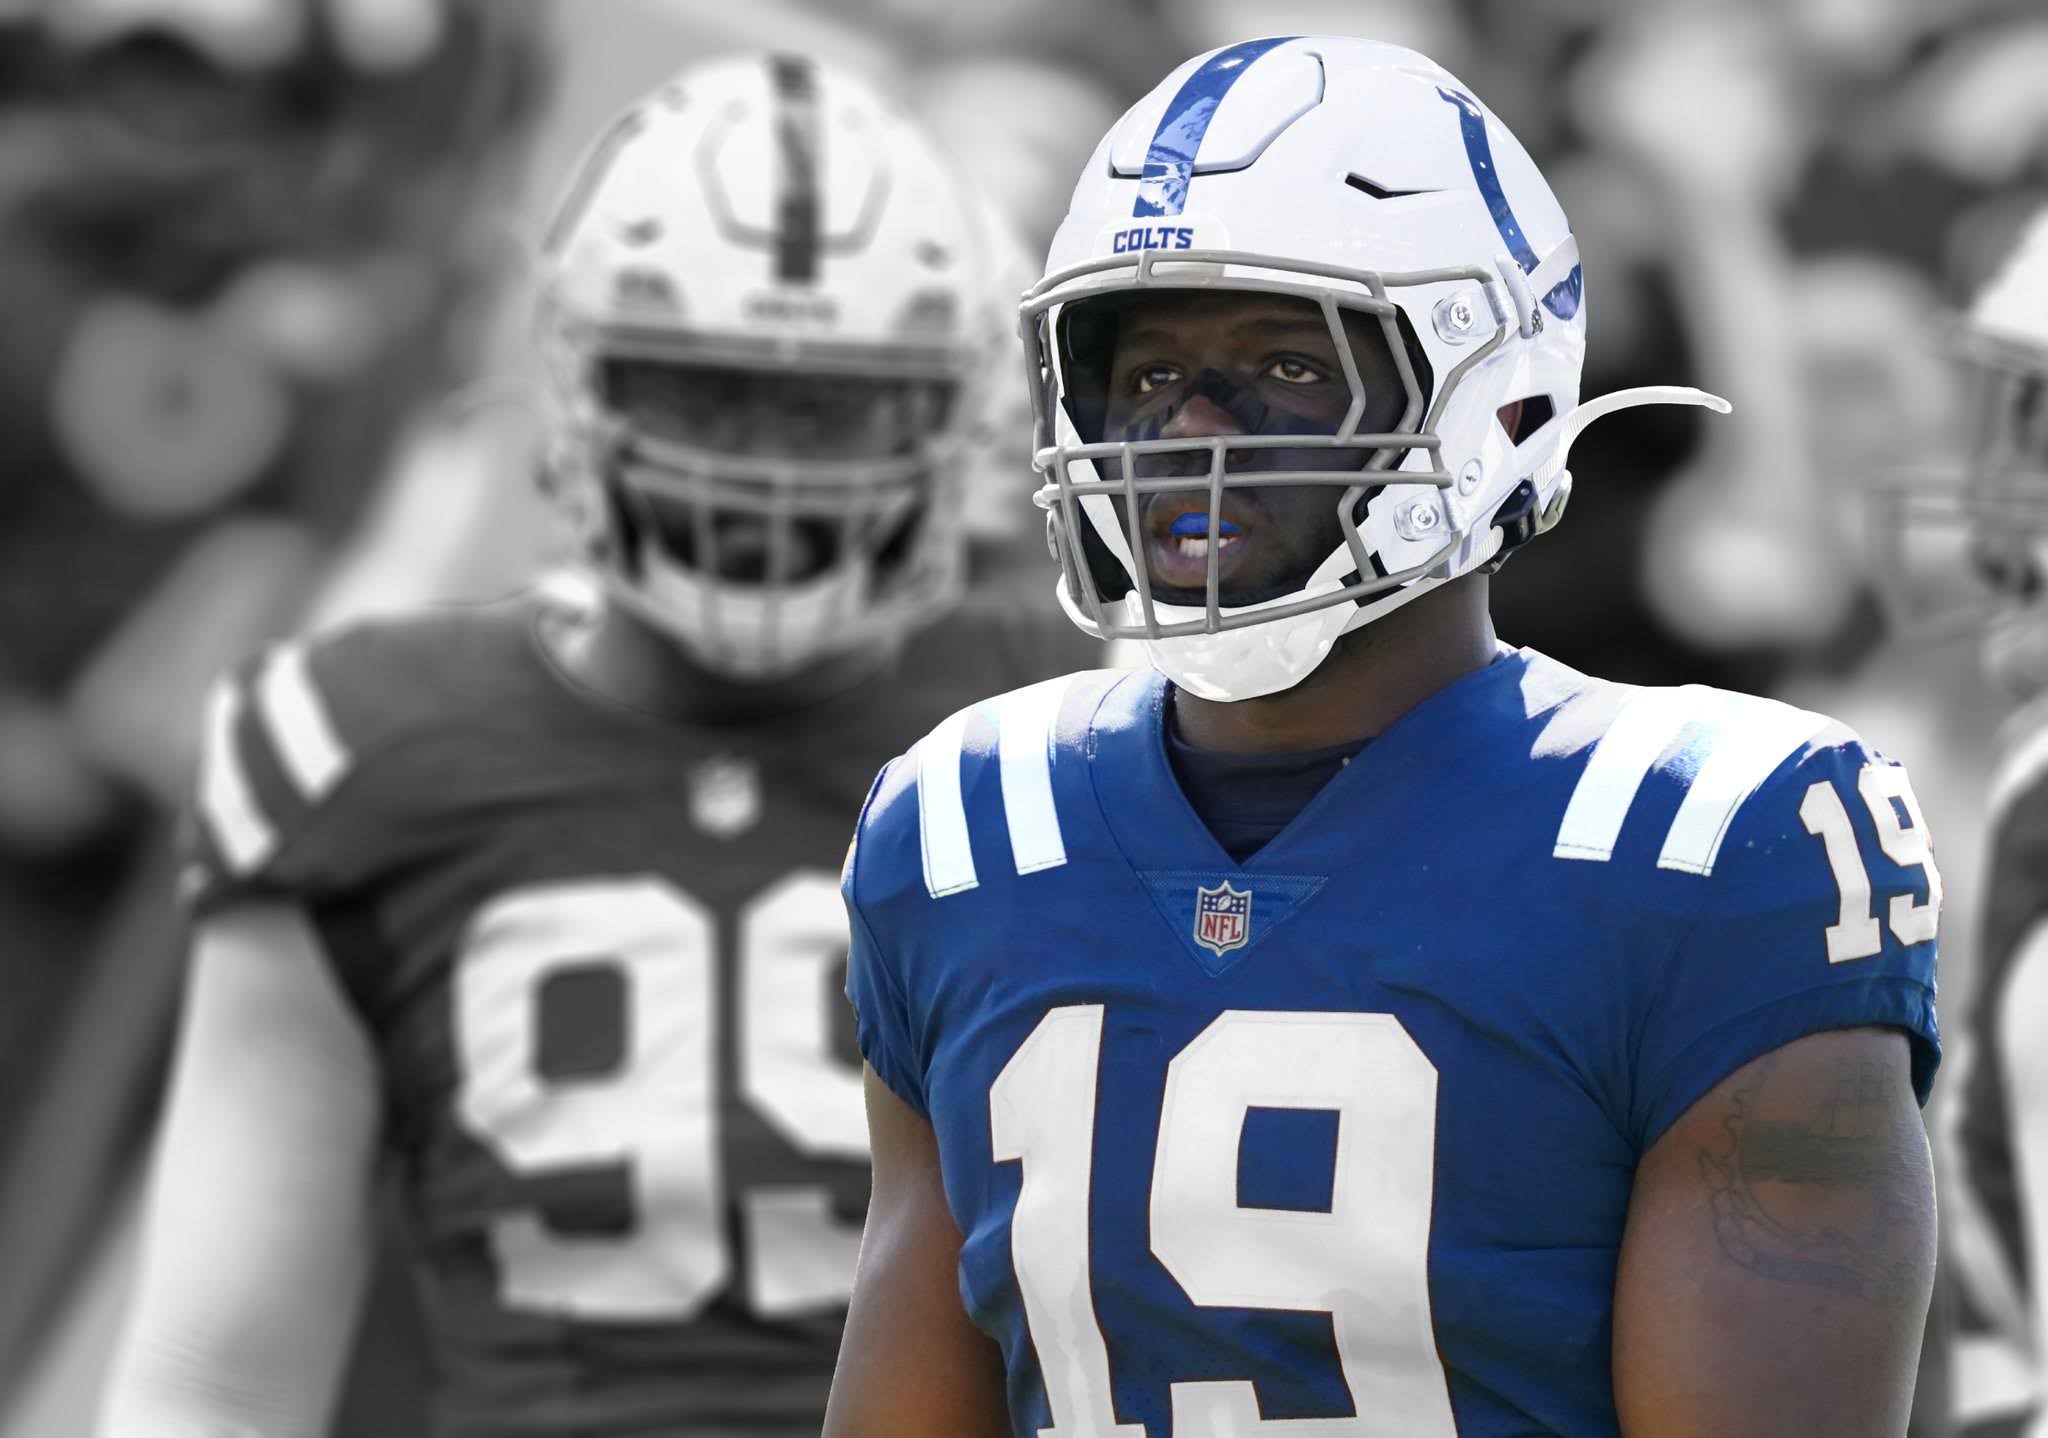 The Colts have had a better Offseason than you think